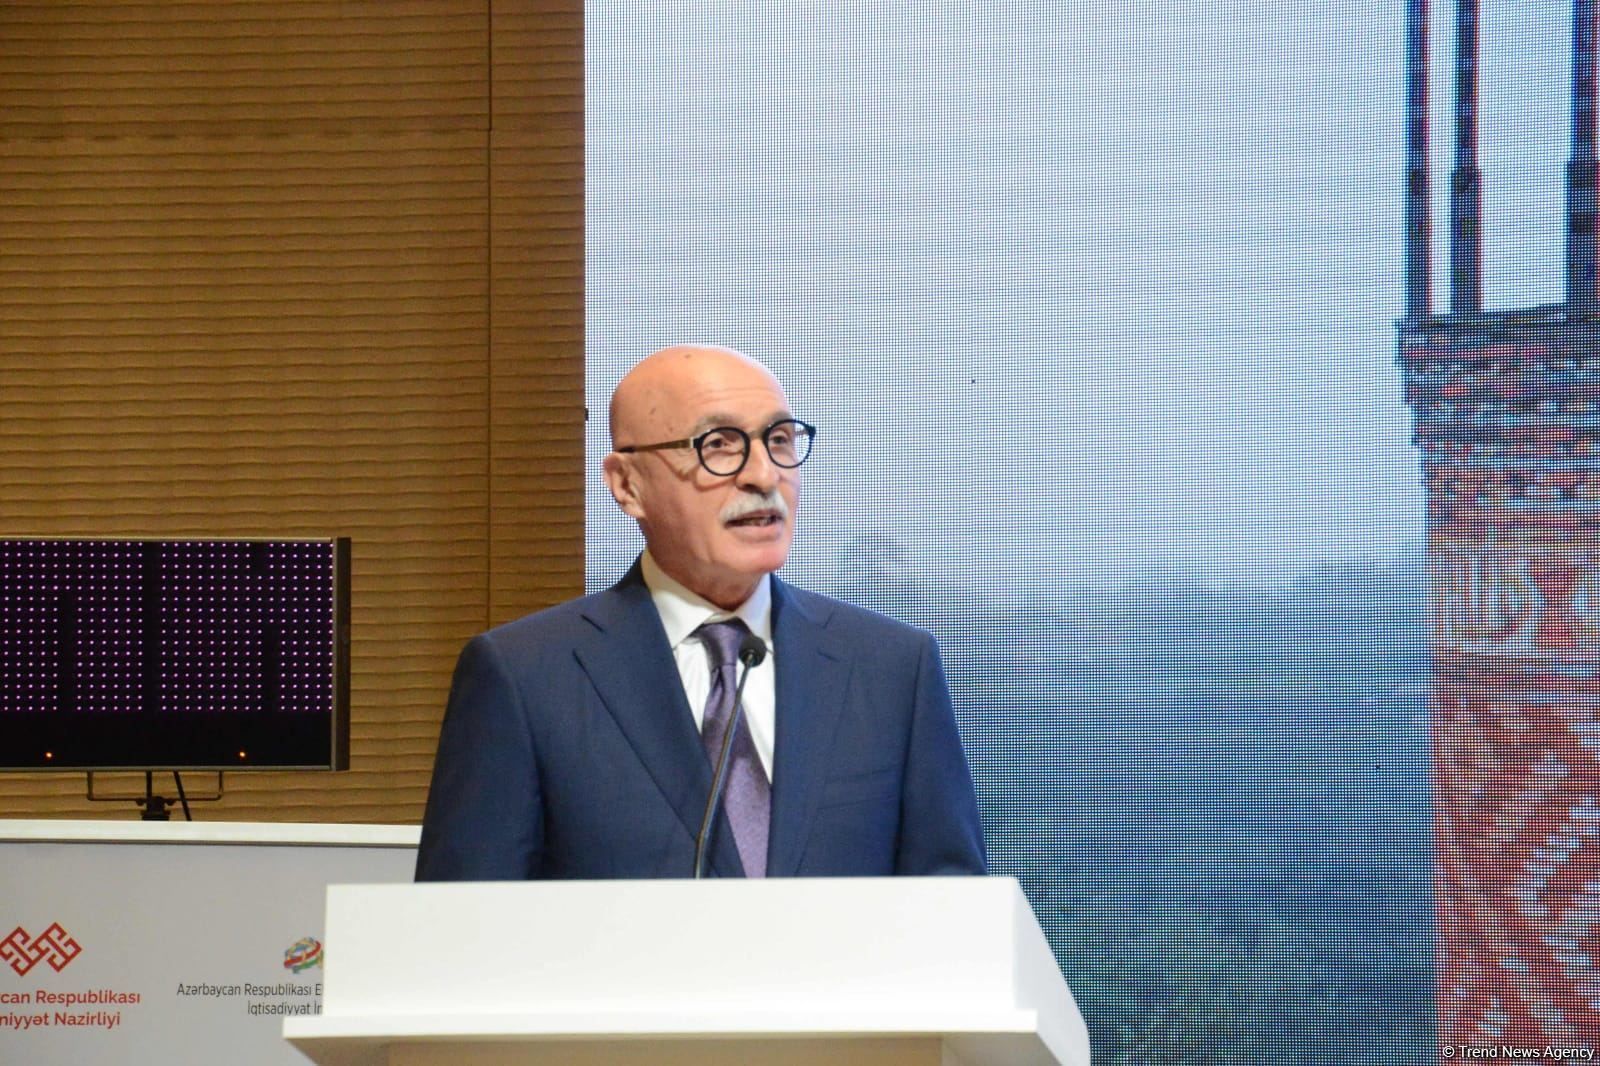 Armenia destroyed 993 educational institutions in previously occupied Azerbaijani territories - official